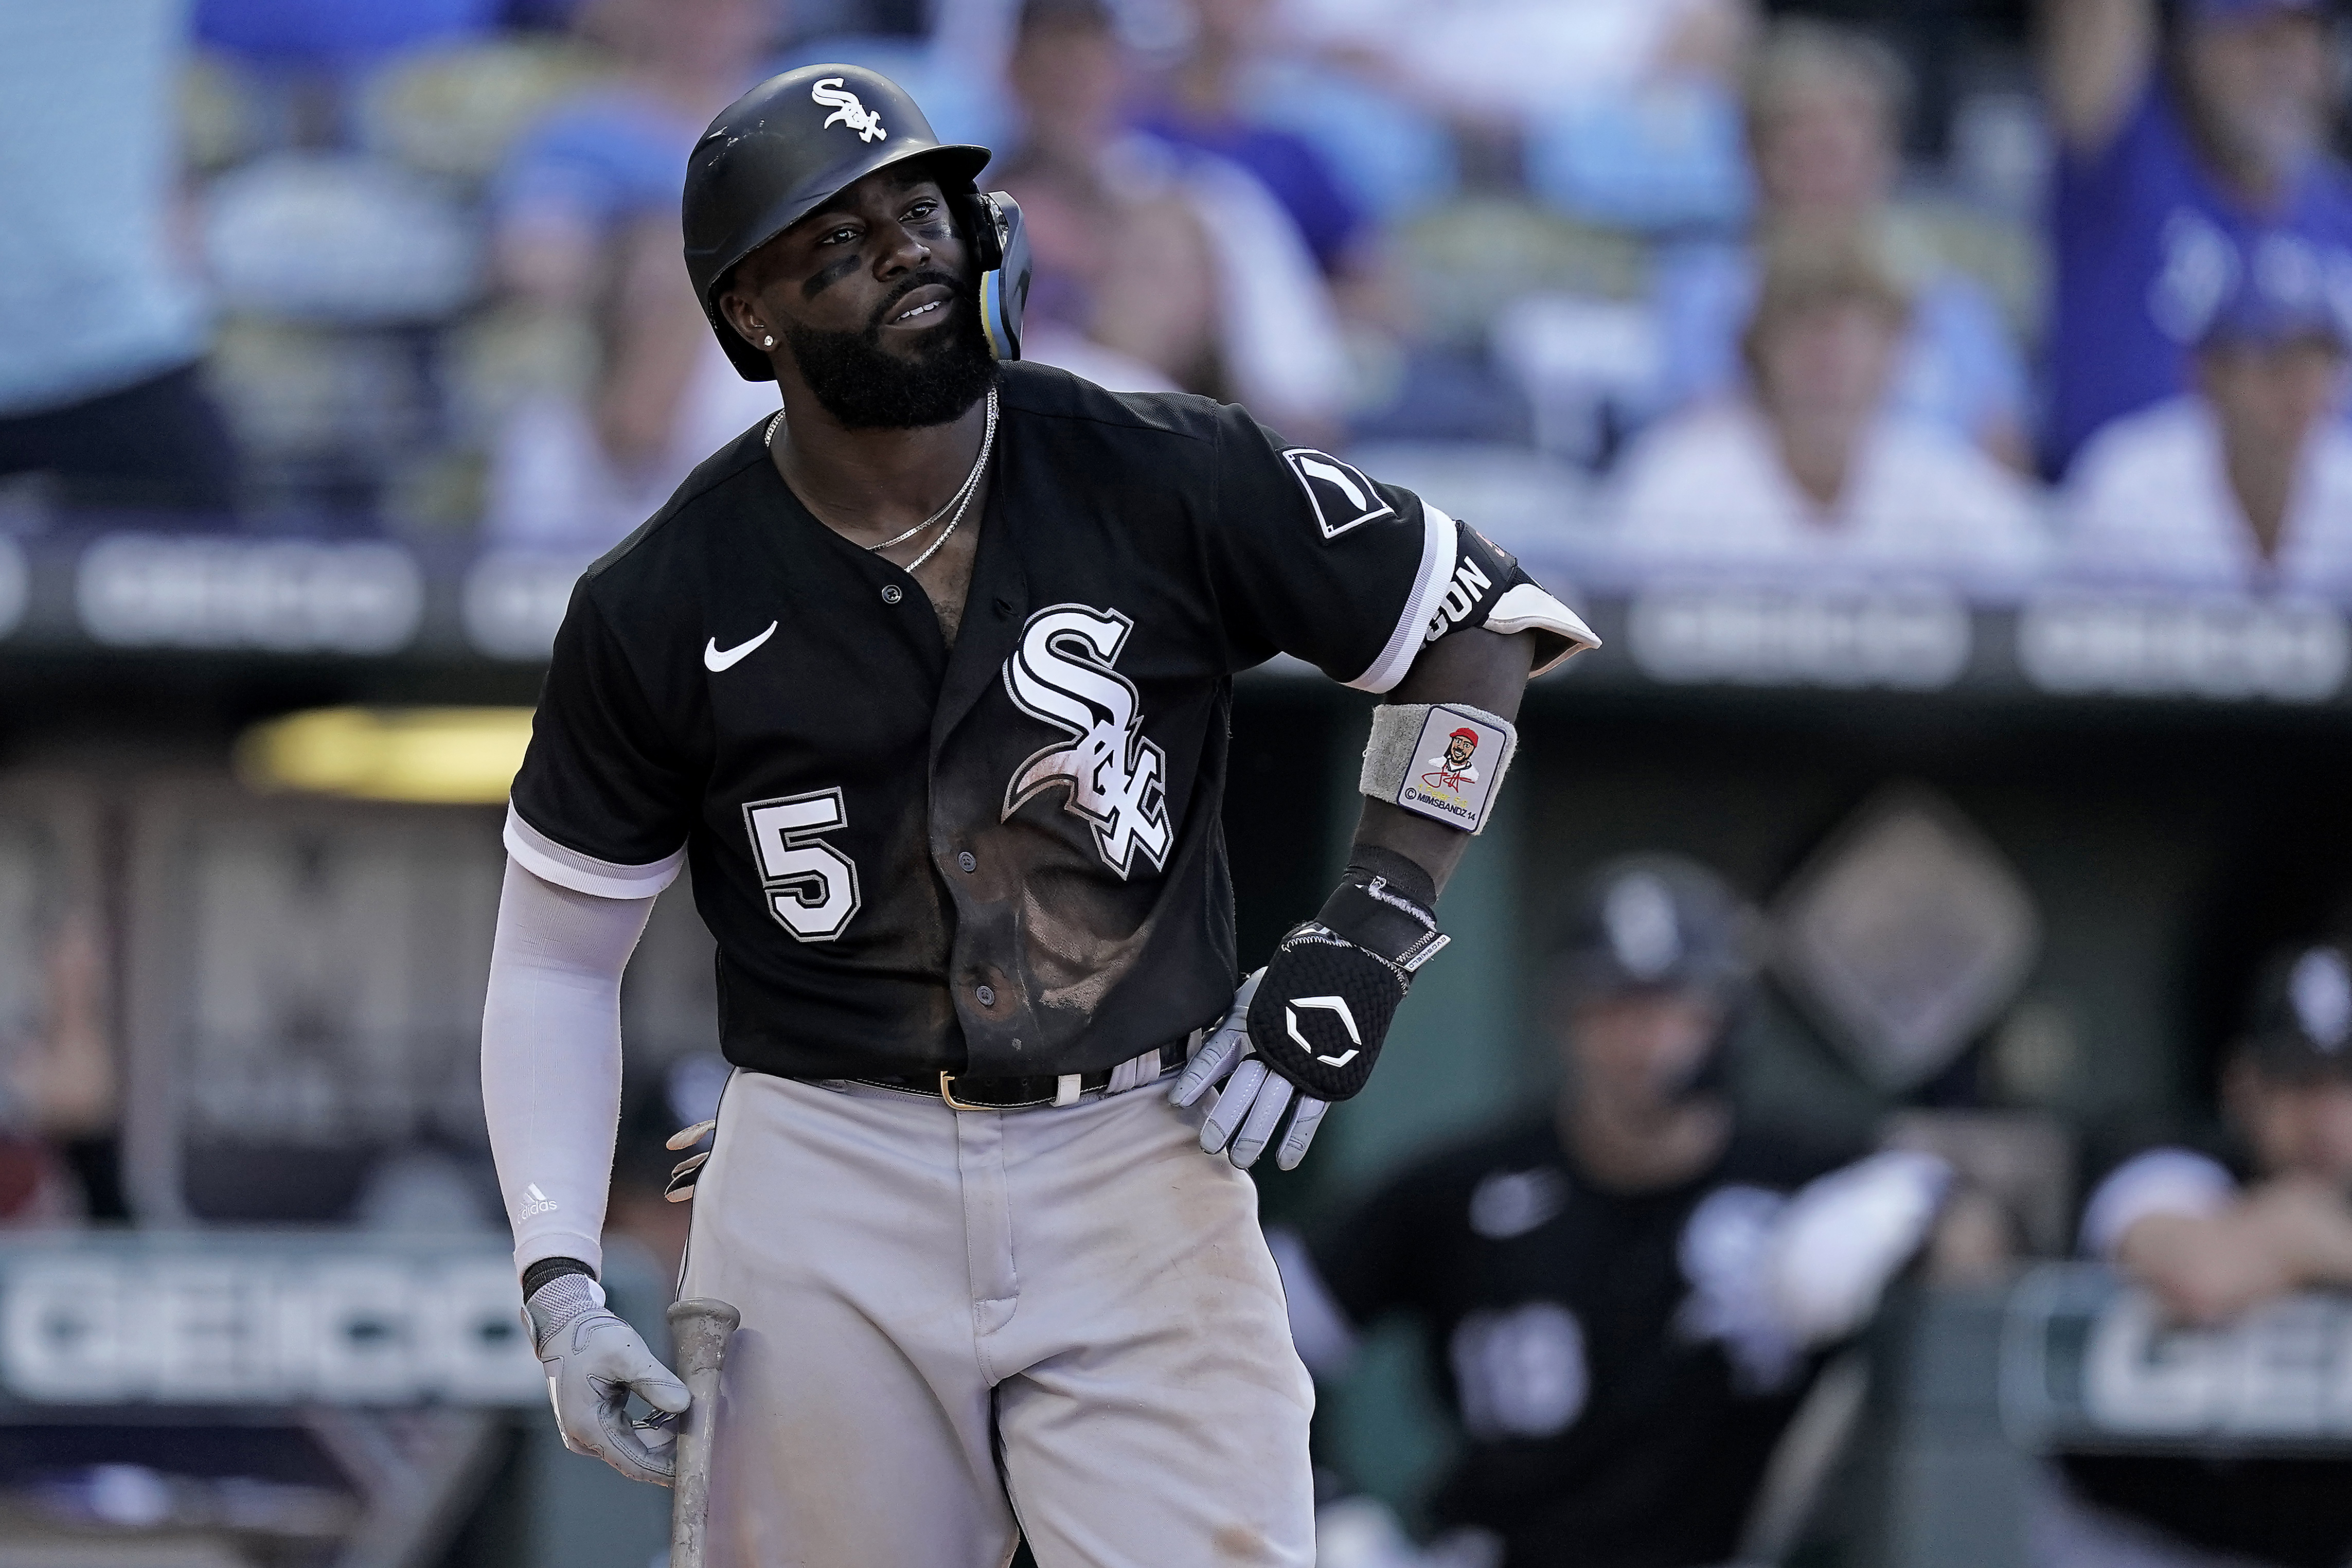 The White Sox have started celebrating dingers with a massive home run  chain